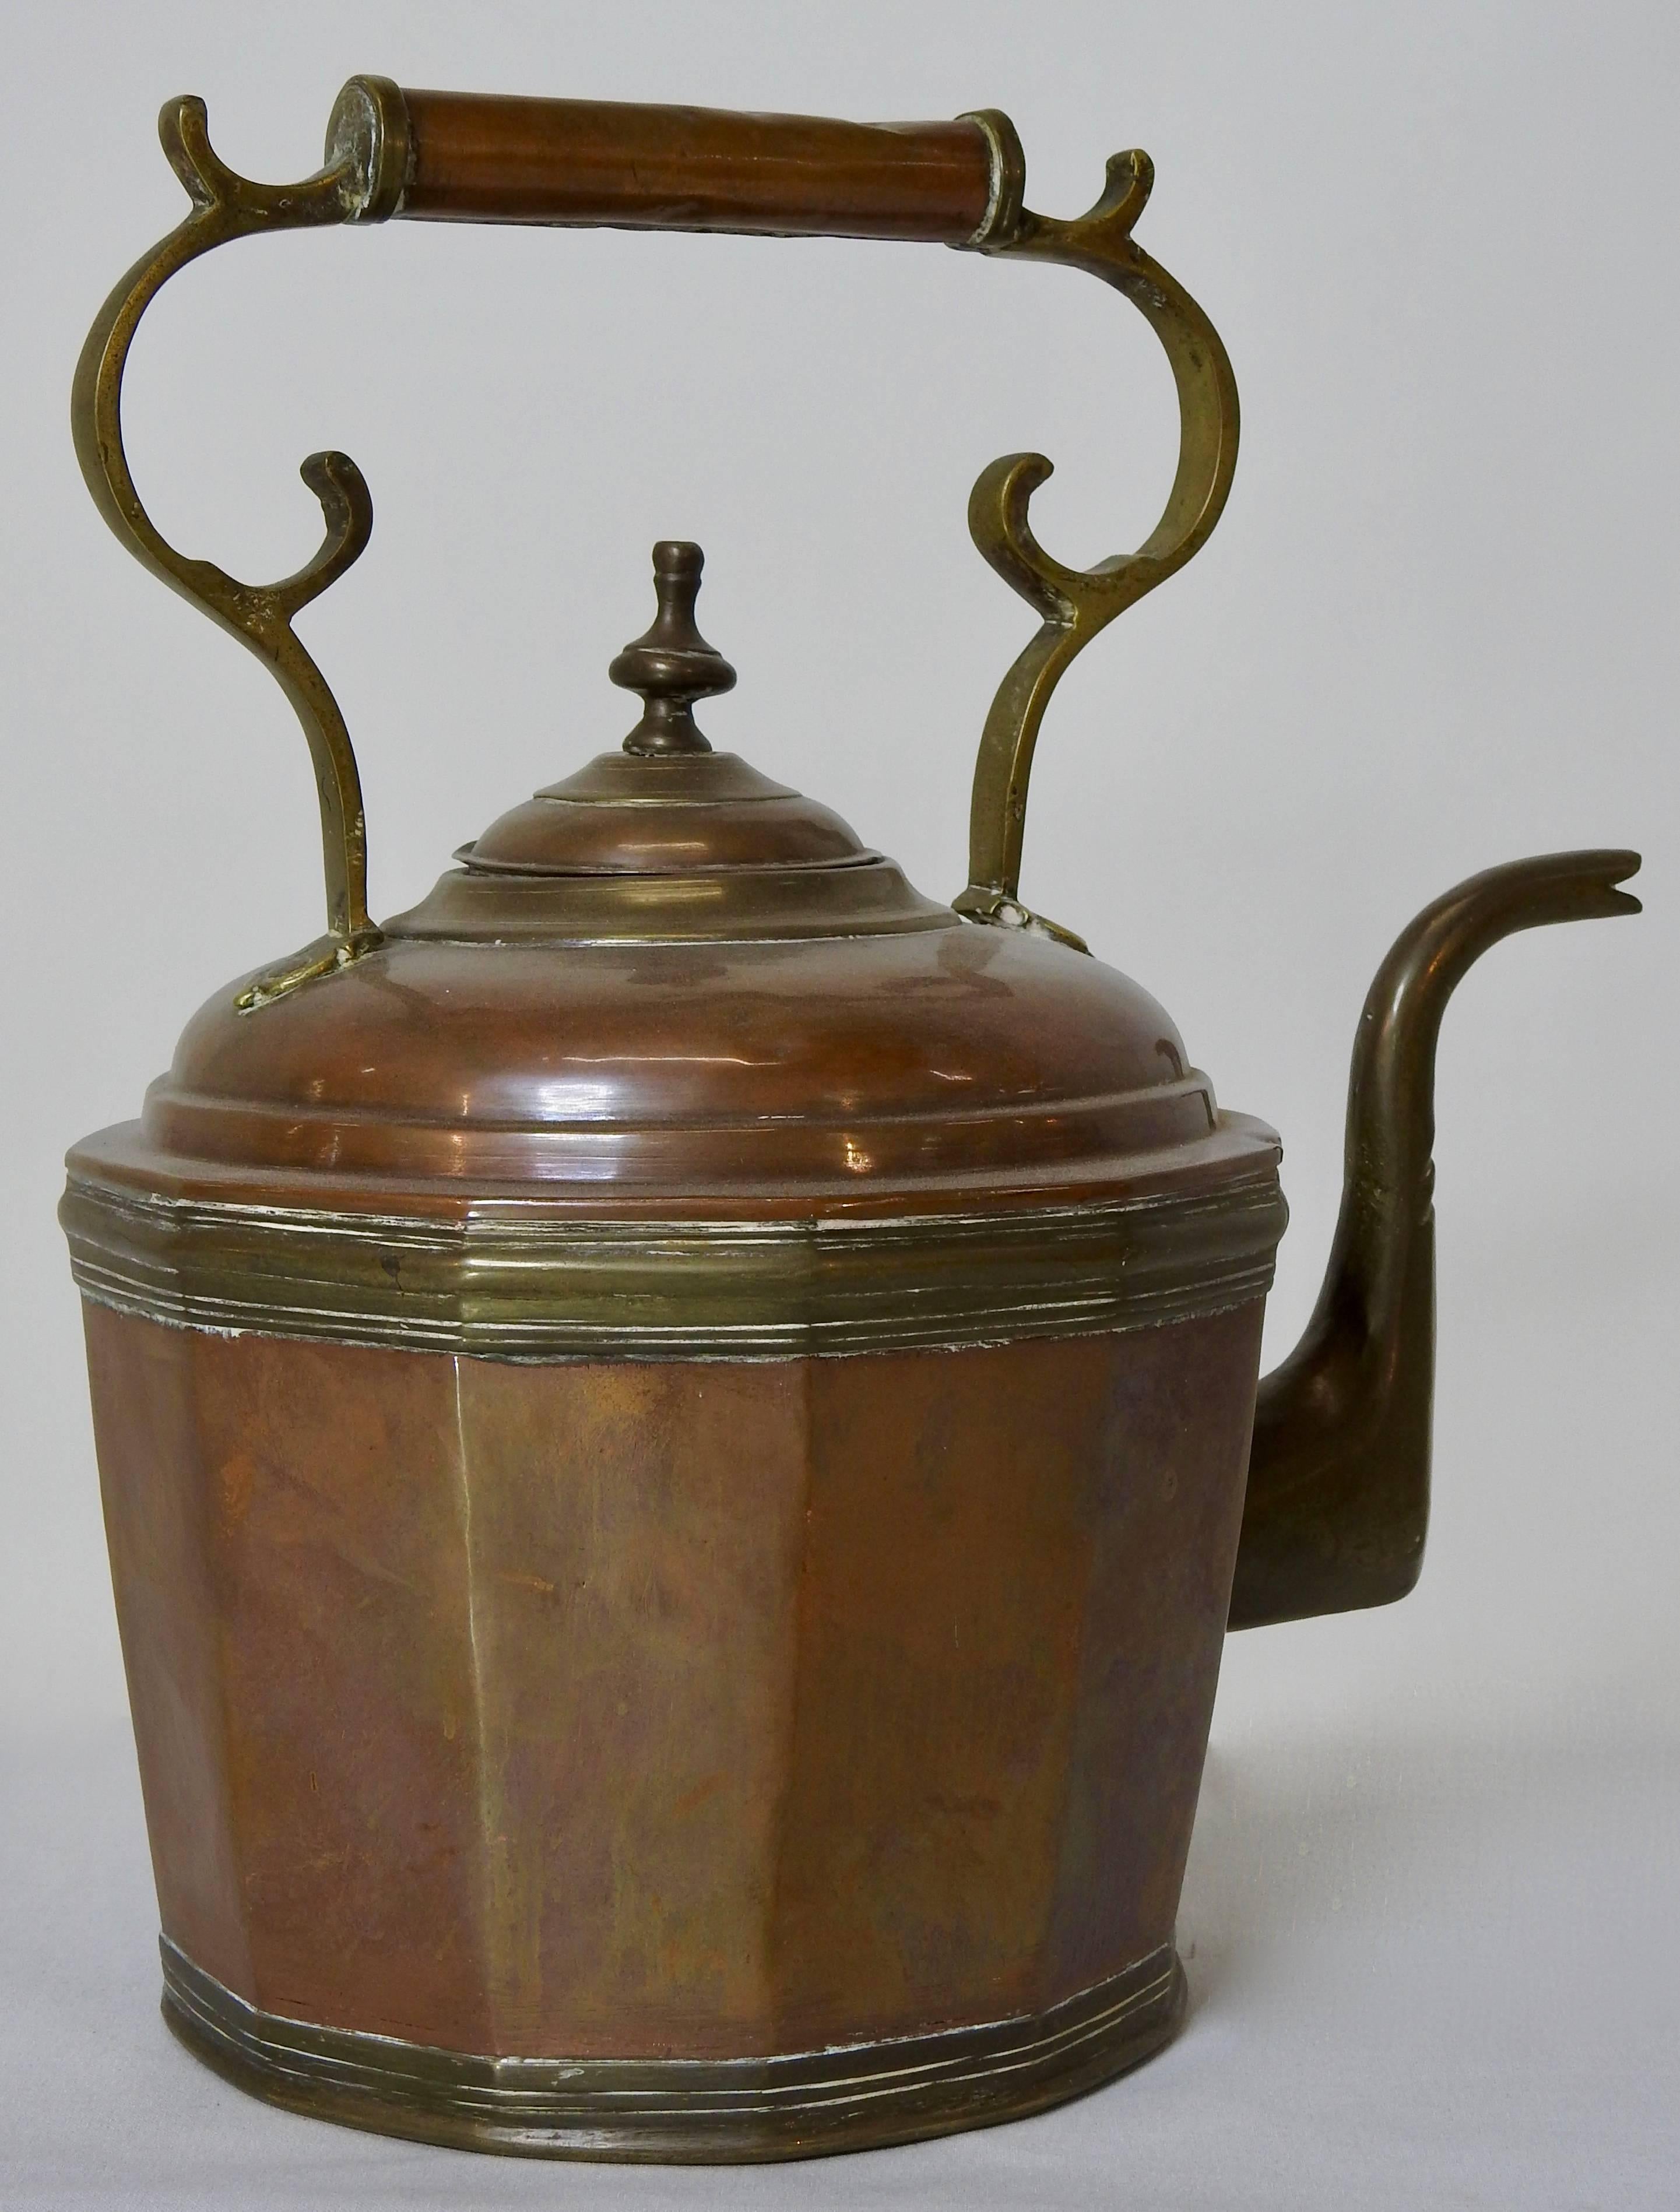 This 19th century copper and brass water pot has detailing like no other. Starting at the bottom with a beautiful brass band that wraps all the way around. Leading up to a shaped copper vessel the spout that comes out from a stamped brass inset.